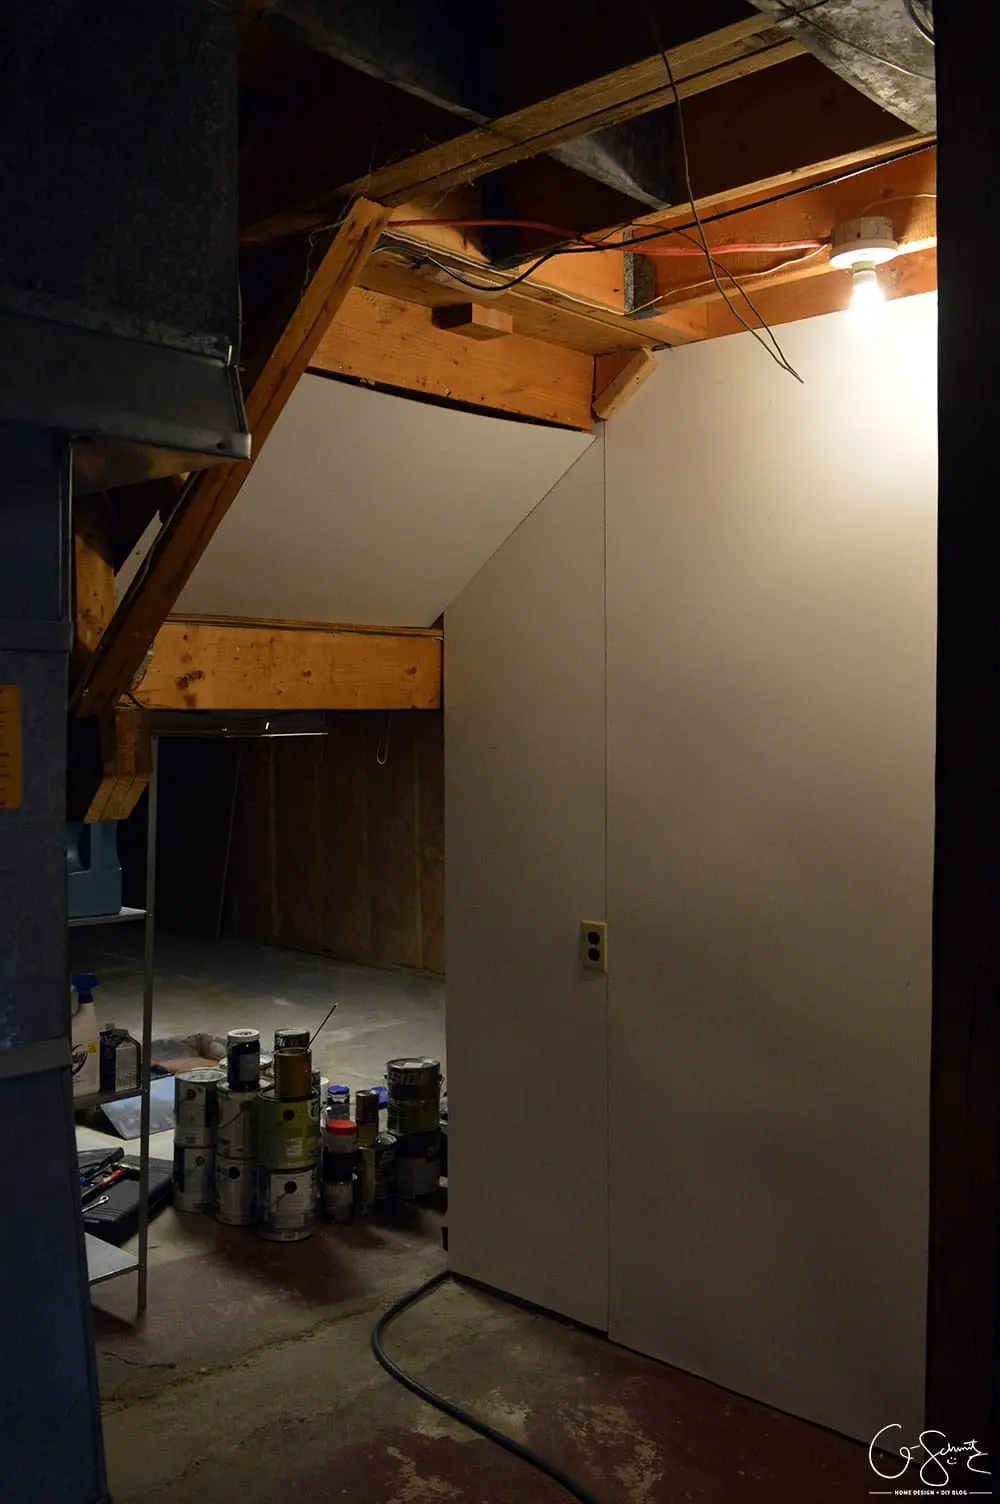 Cleaning the basement and prepping for ORC (one room challenge) has got me excited to share with you all the plans I have for the space (next week!).